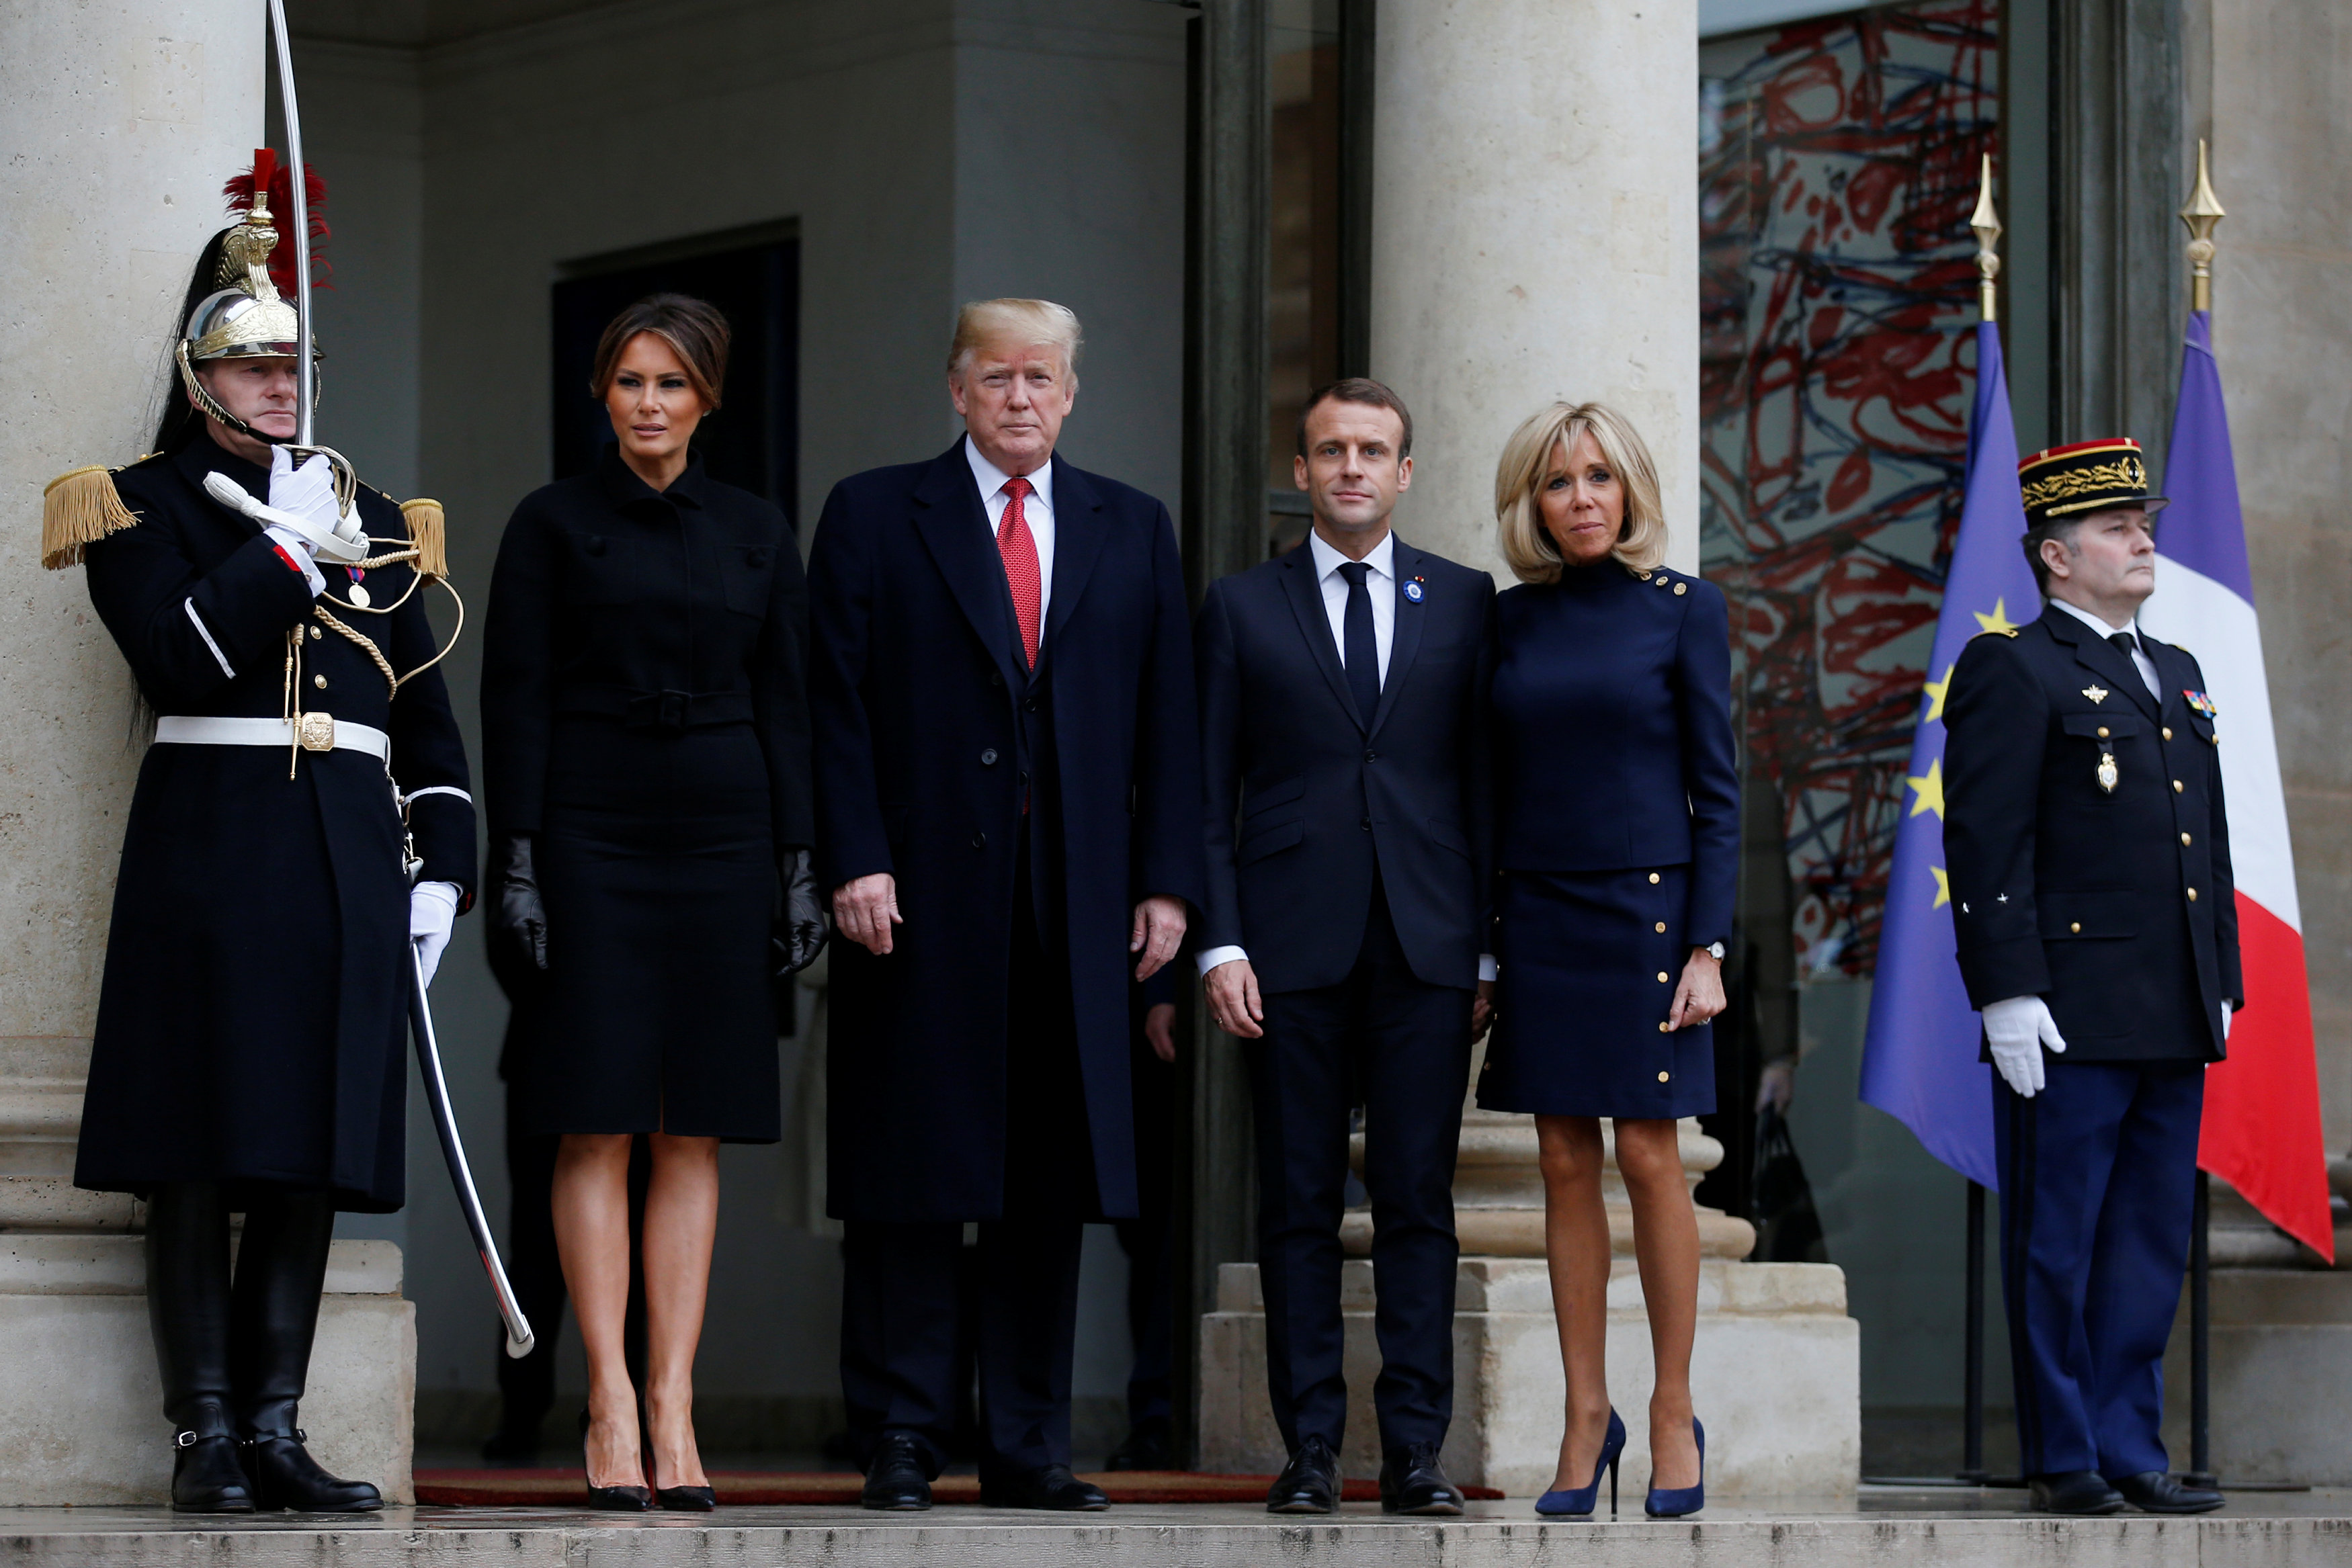 French President Emmanuel Macron and his wife Brigitte Macron accompany US President Donald Trump and first lady Melania Trump as they leave the Elysee Palace in Paris